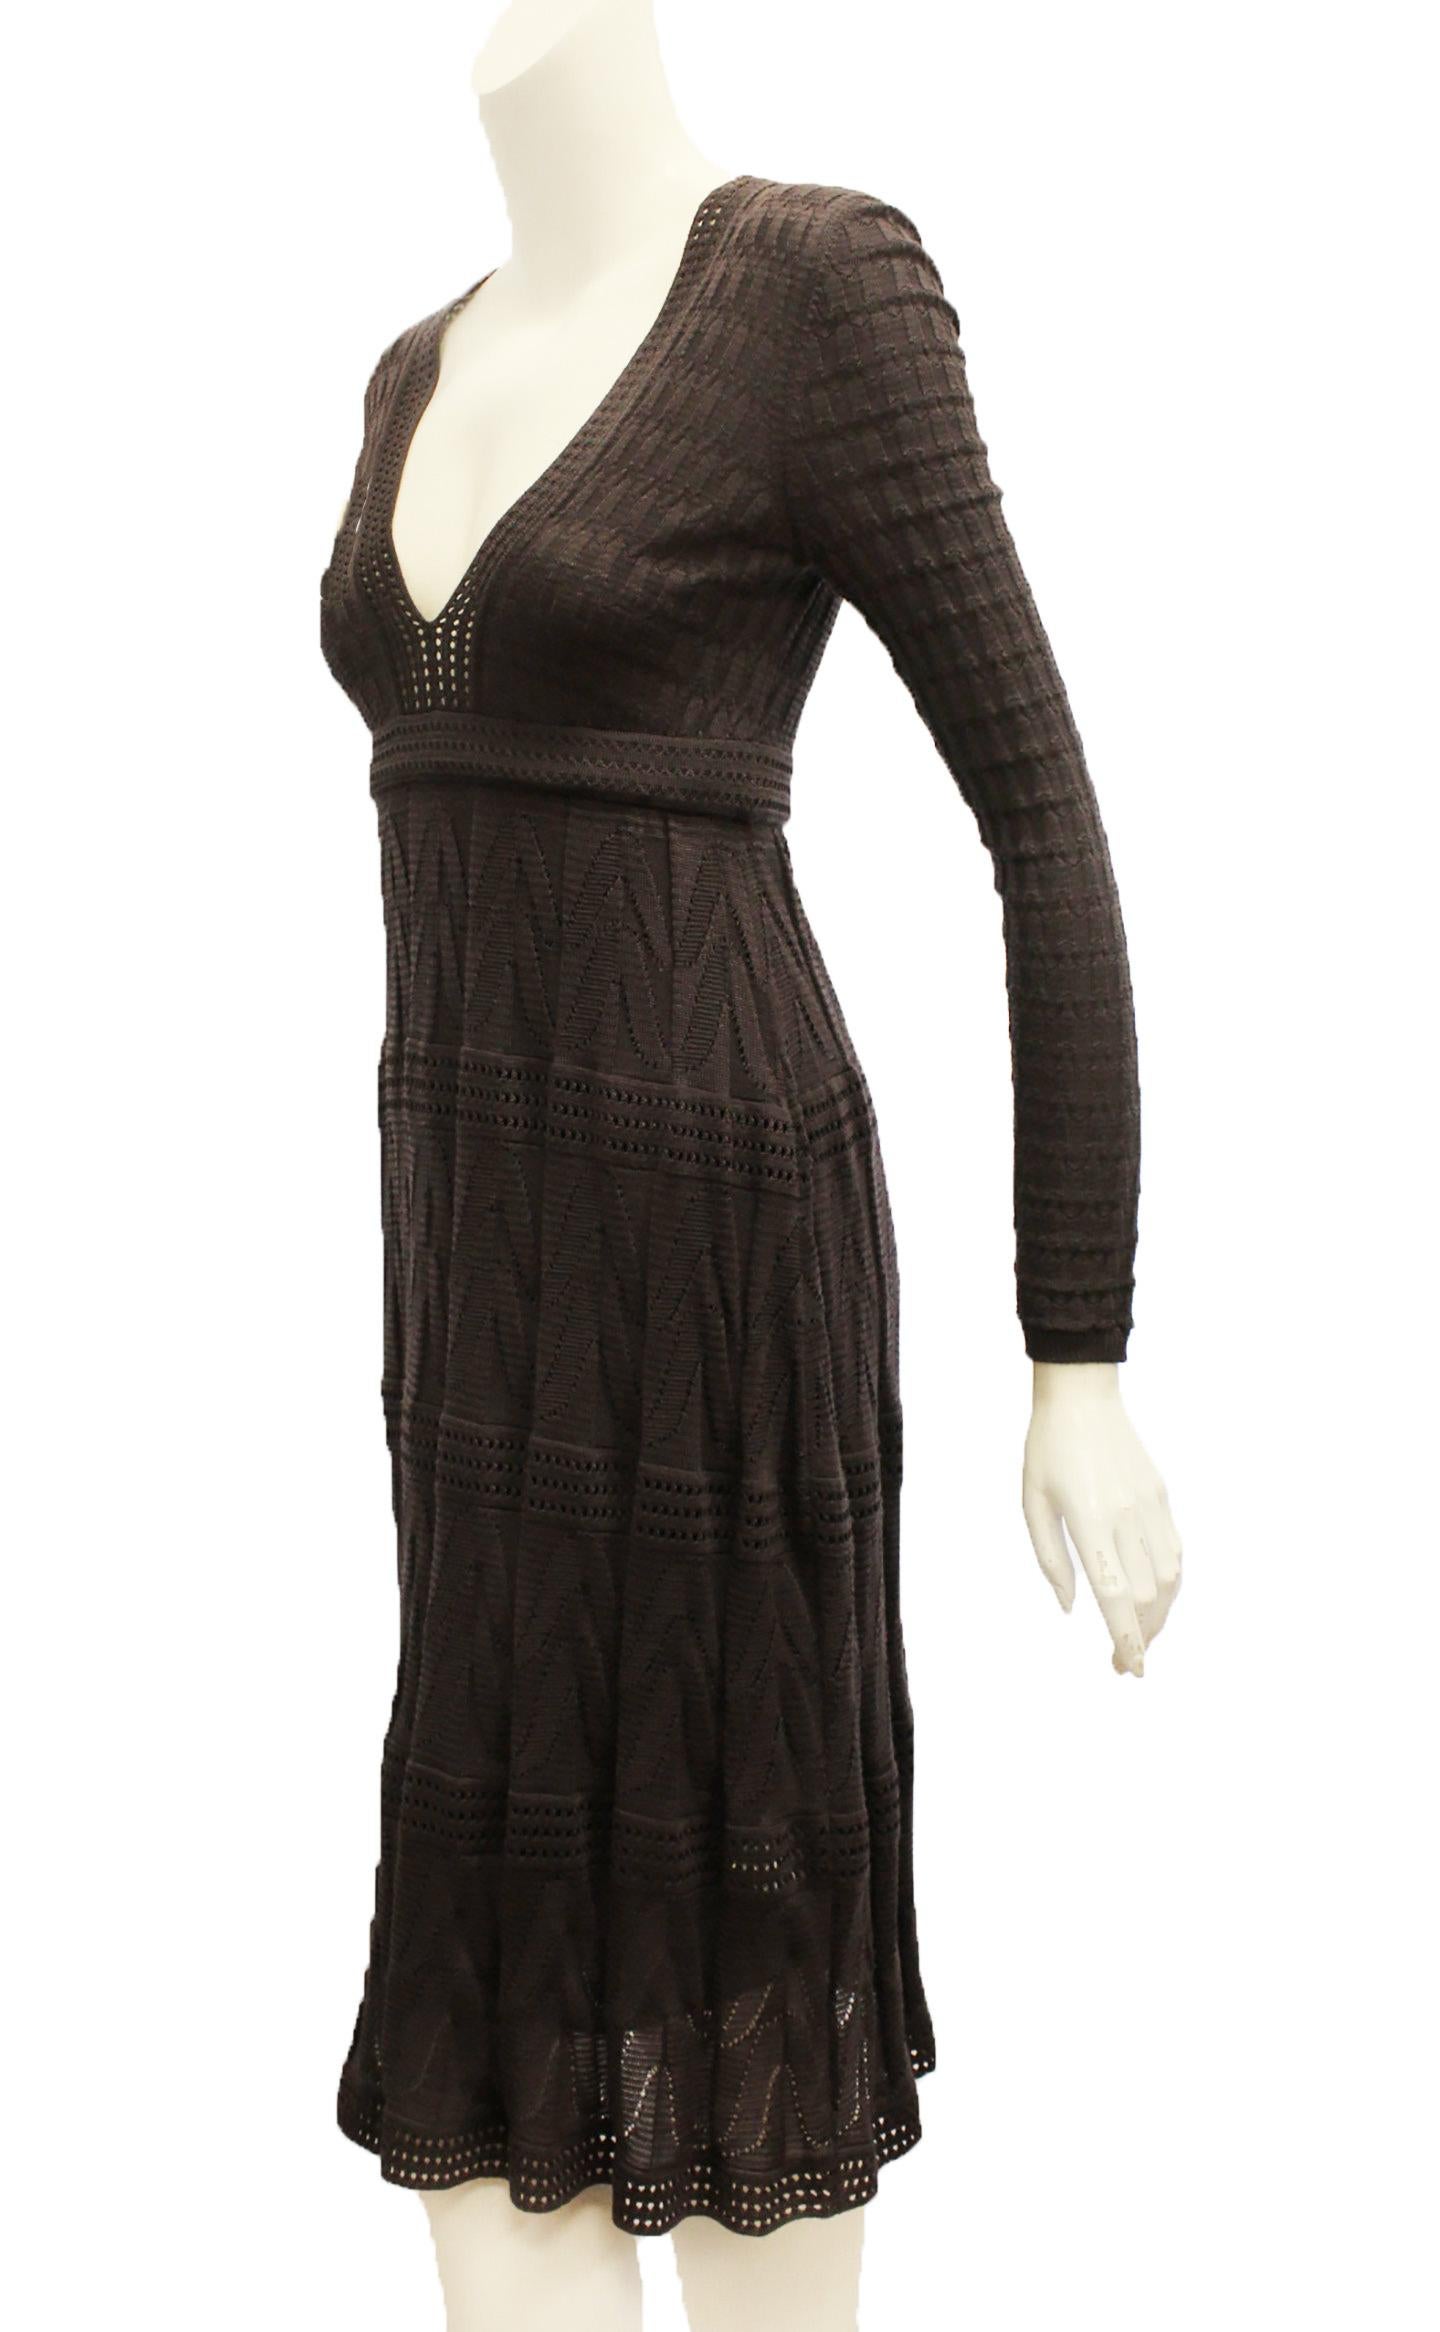 Missoni plum color dress with plunging V neckline crafted with wool and designed to show just a hint of skin, you'll love it for day to evening finesse.  The long sleeves are ribbed.  The trim on the V neck, around waist and on the skirt are open